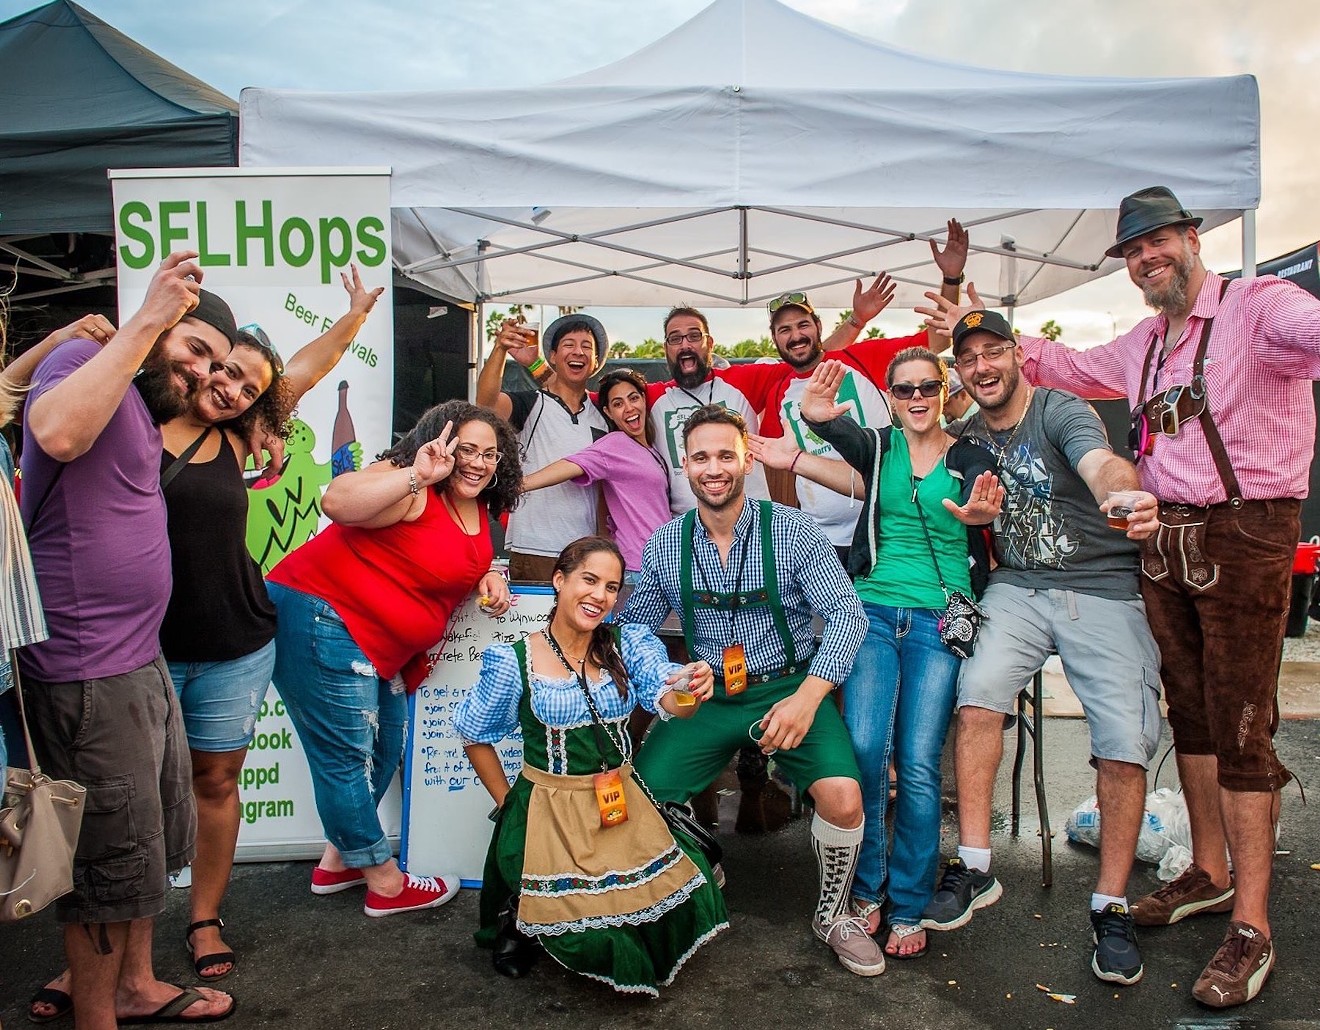 A group shot from the 2019 SFL Hops Craft Carousel Beer Festival.